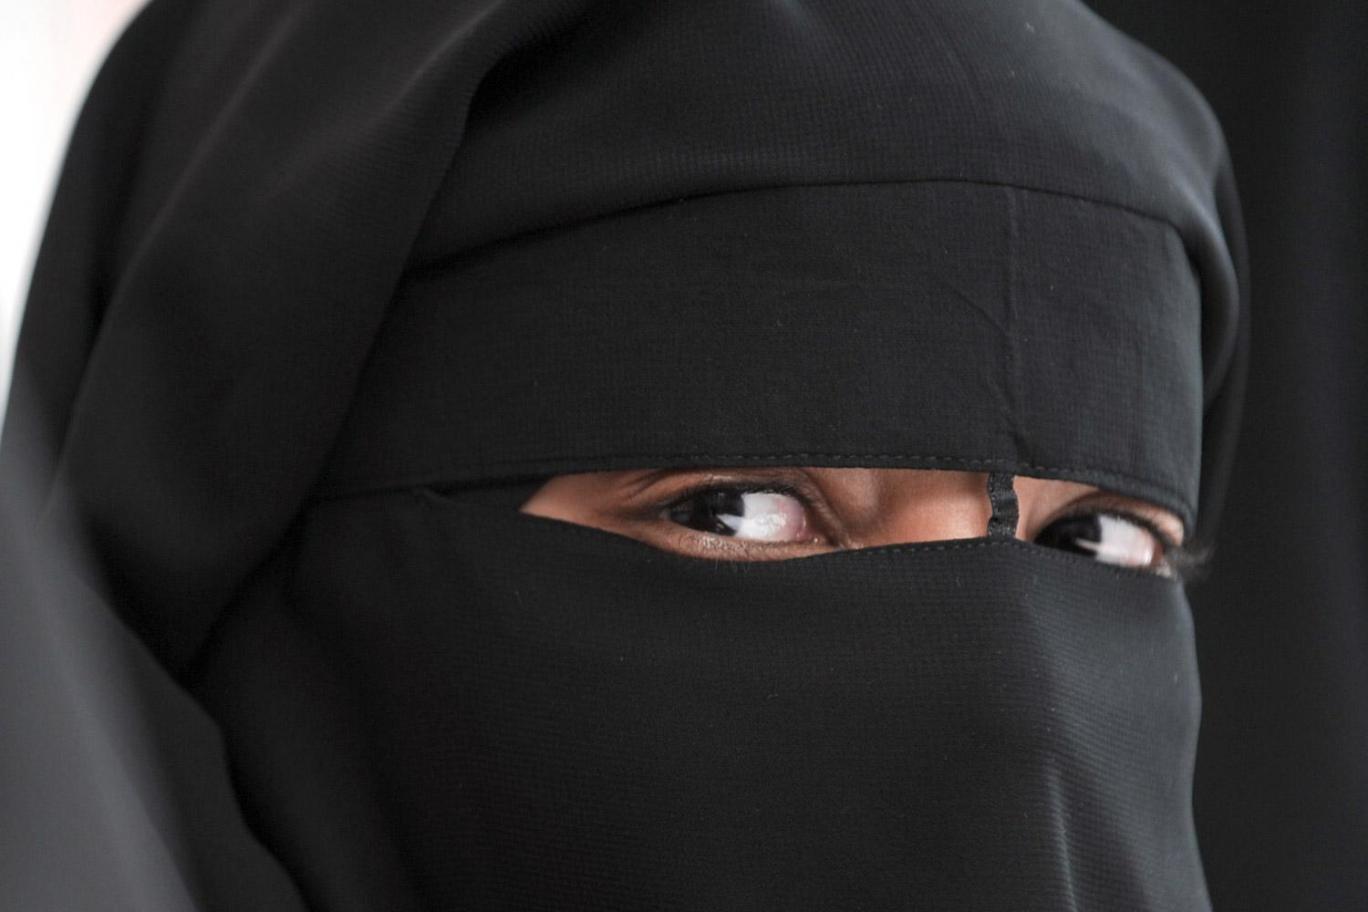 Muslim woman fined €30,000 for ‘refusing to remove niqab’ in Italy